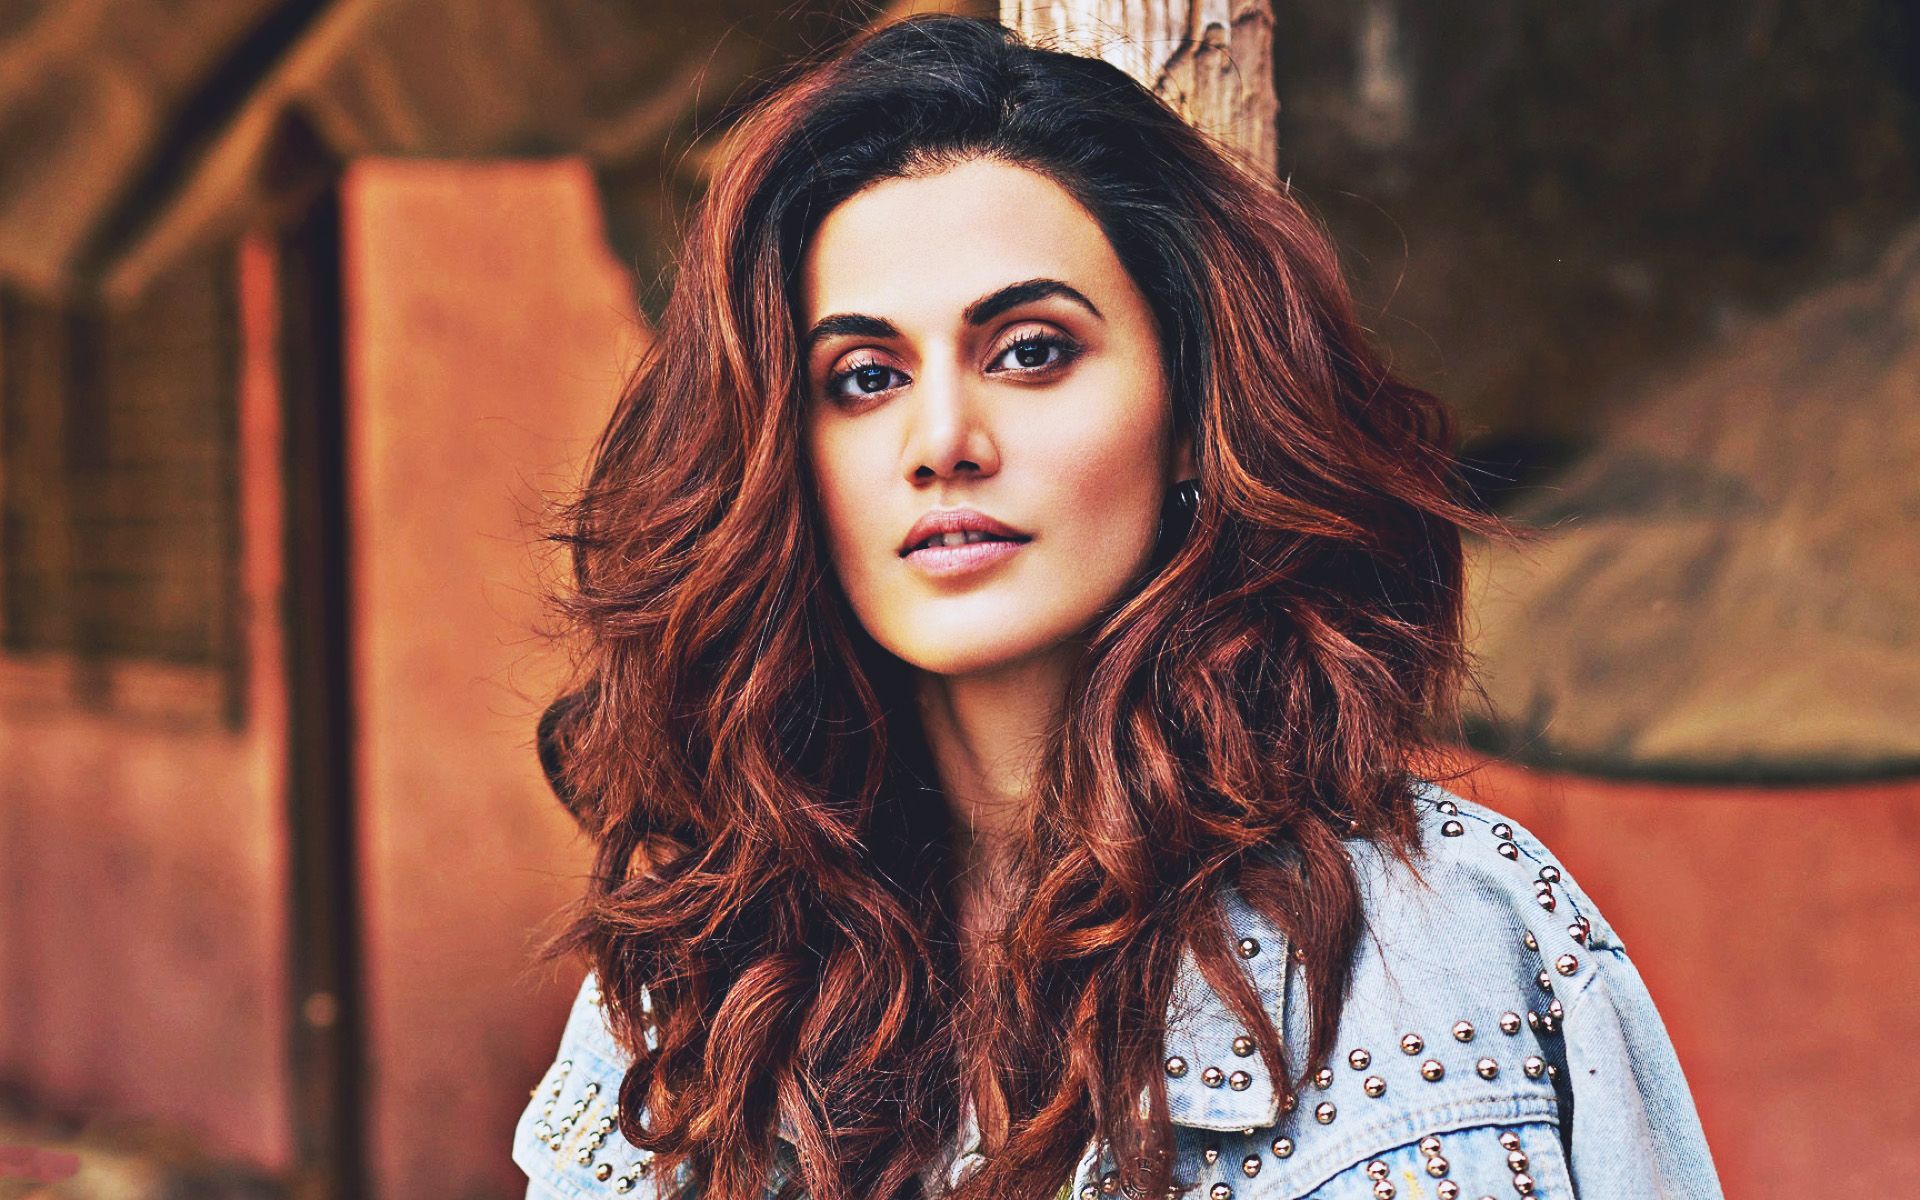 Download Wallpaper Taapsee Pannu, Close Up, Bollywood, Indian Celebrity, Beauty, Indian Actress, Taapsee Pannu